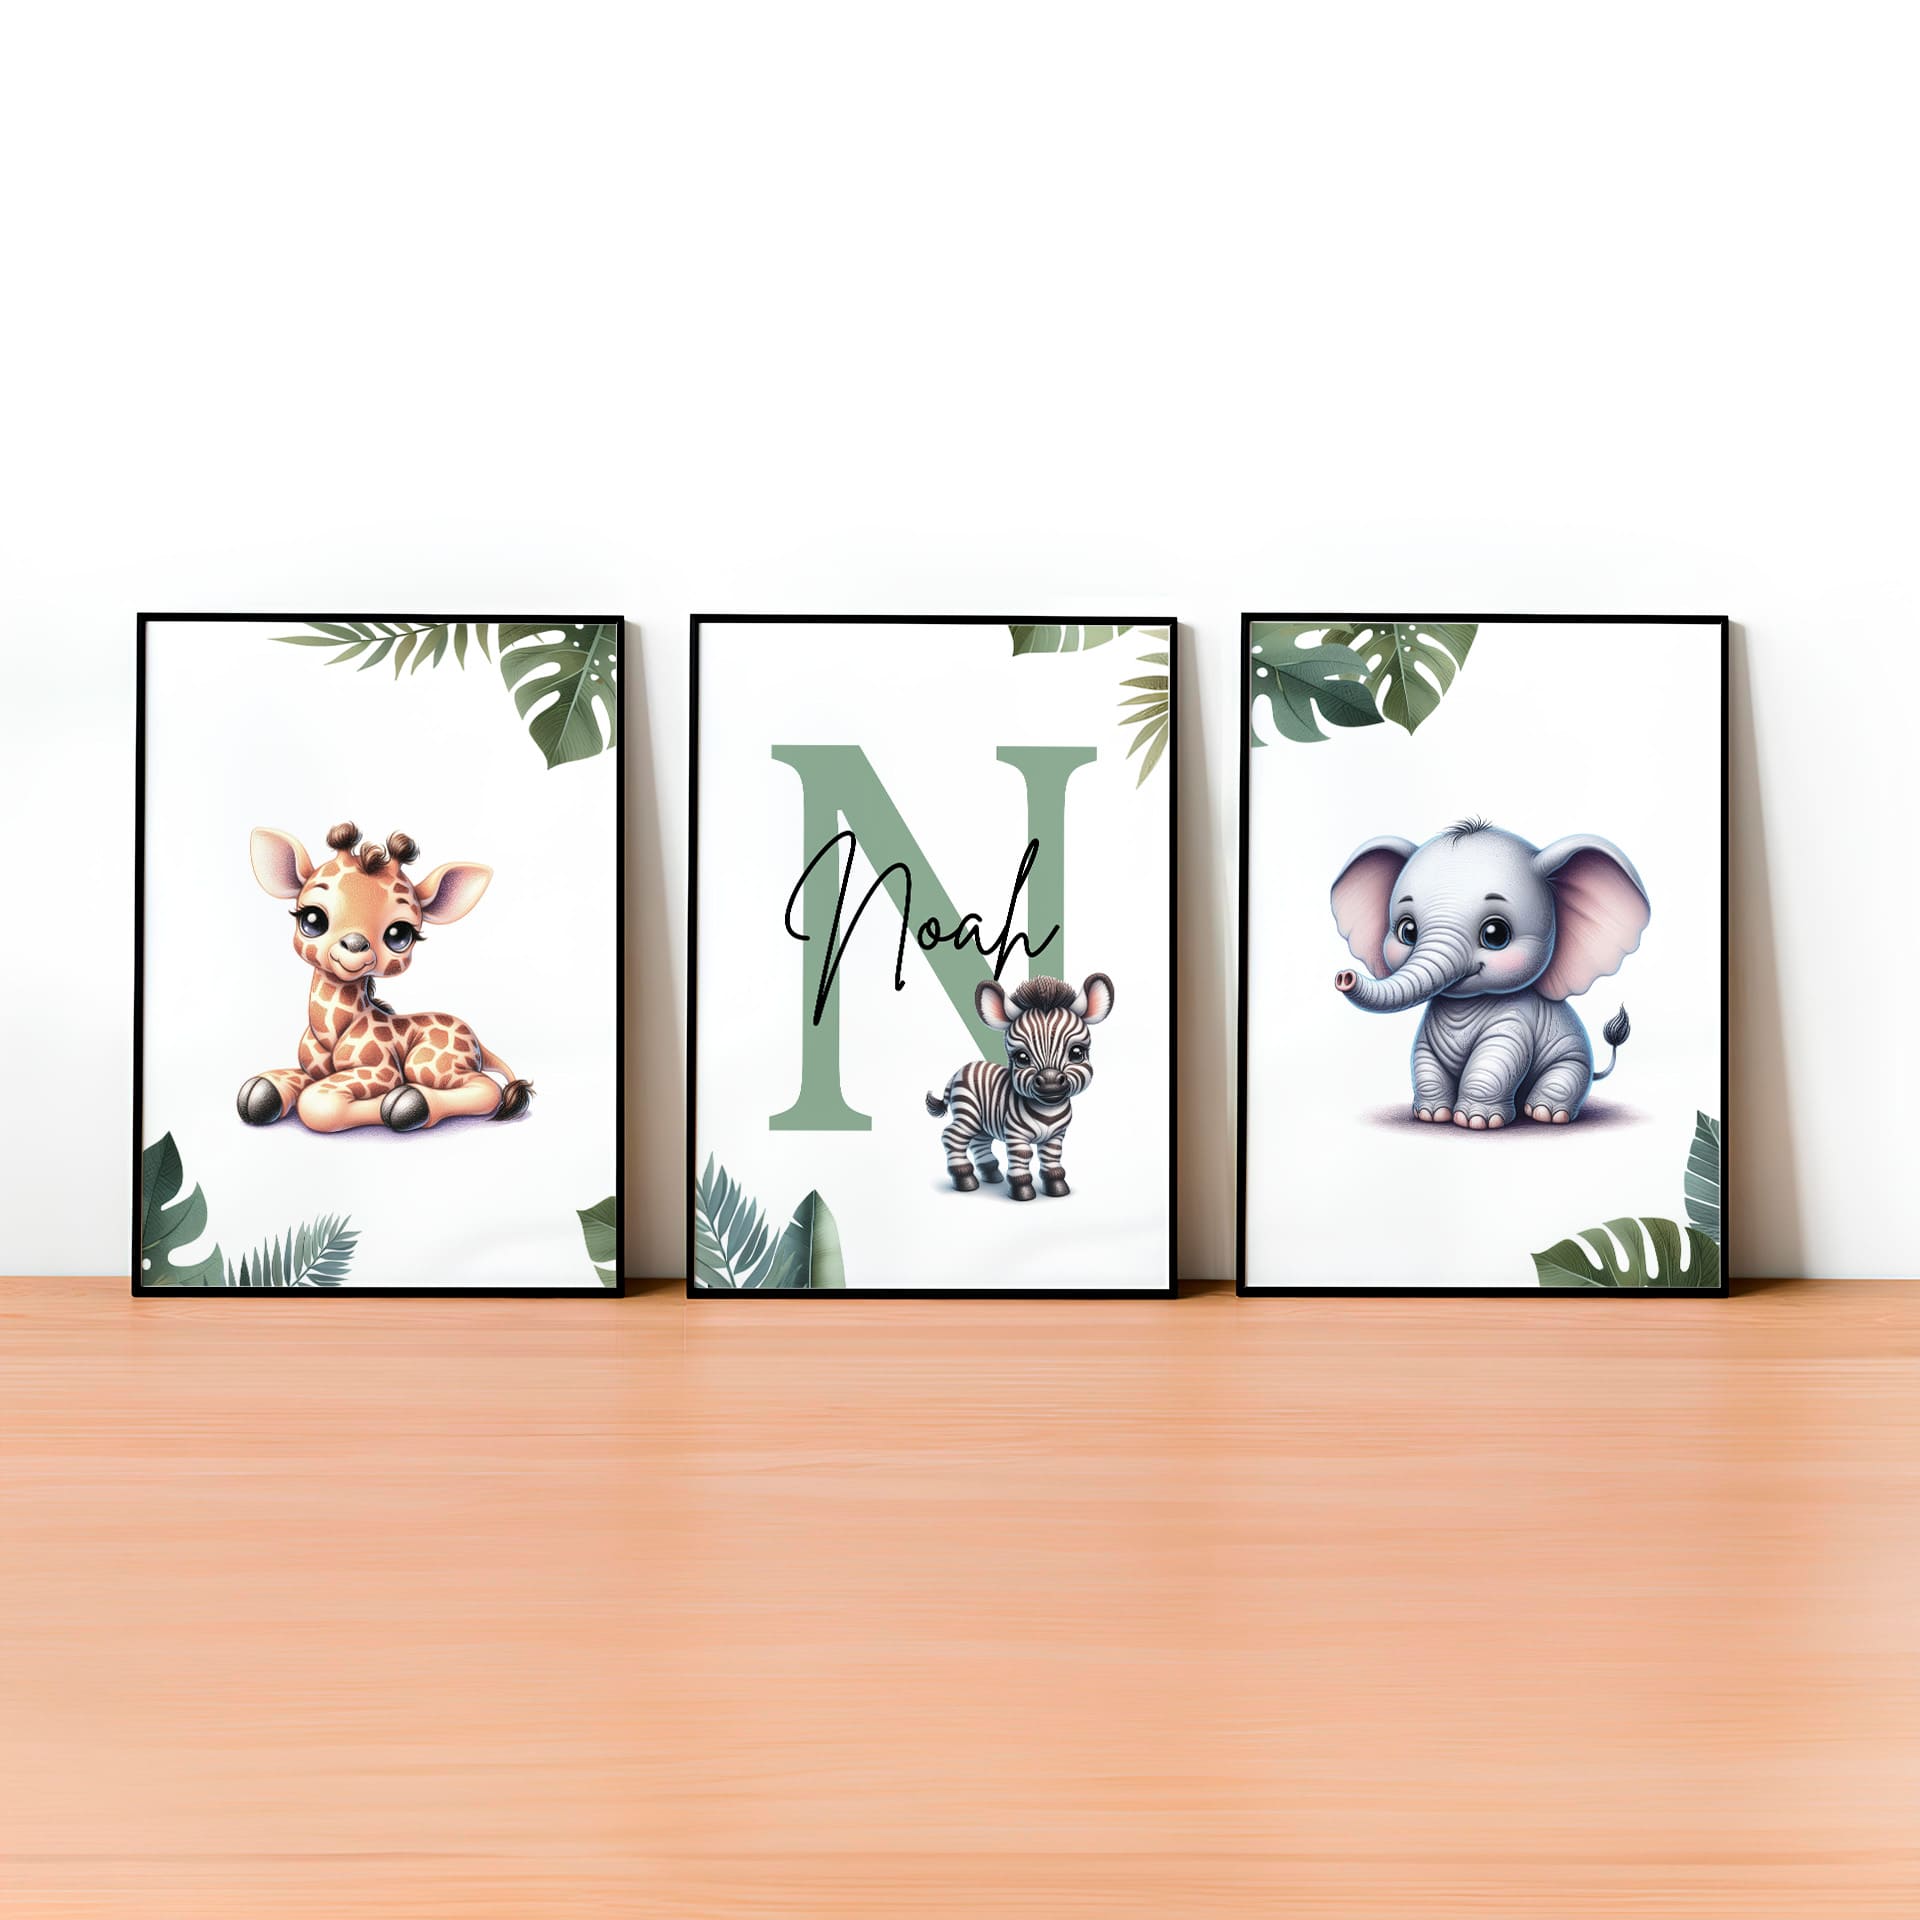 Set of  three A4 prints featuring cartoony and brightly illustrated safari animals – an elephant, giraffe, and zebra. The animals are depicted in the style of coloured pencil drawings with jungle-style leaves adorning the edges of the prints. The middle print features a smaller animal compared to the others, with a large initial letter in the background. A personalised name is overlaid in black across the initial letter